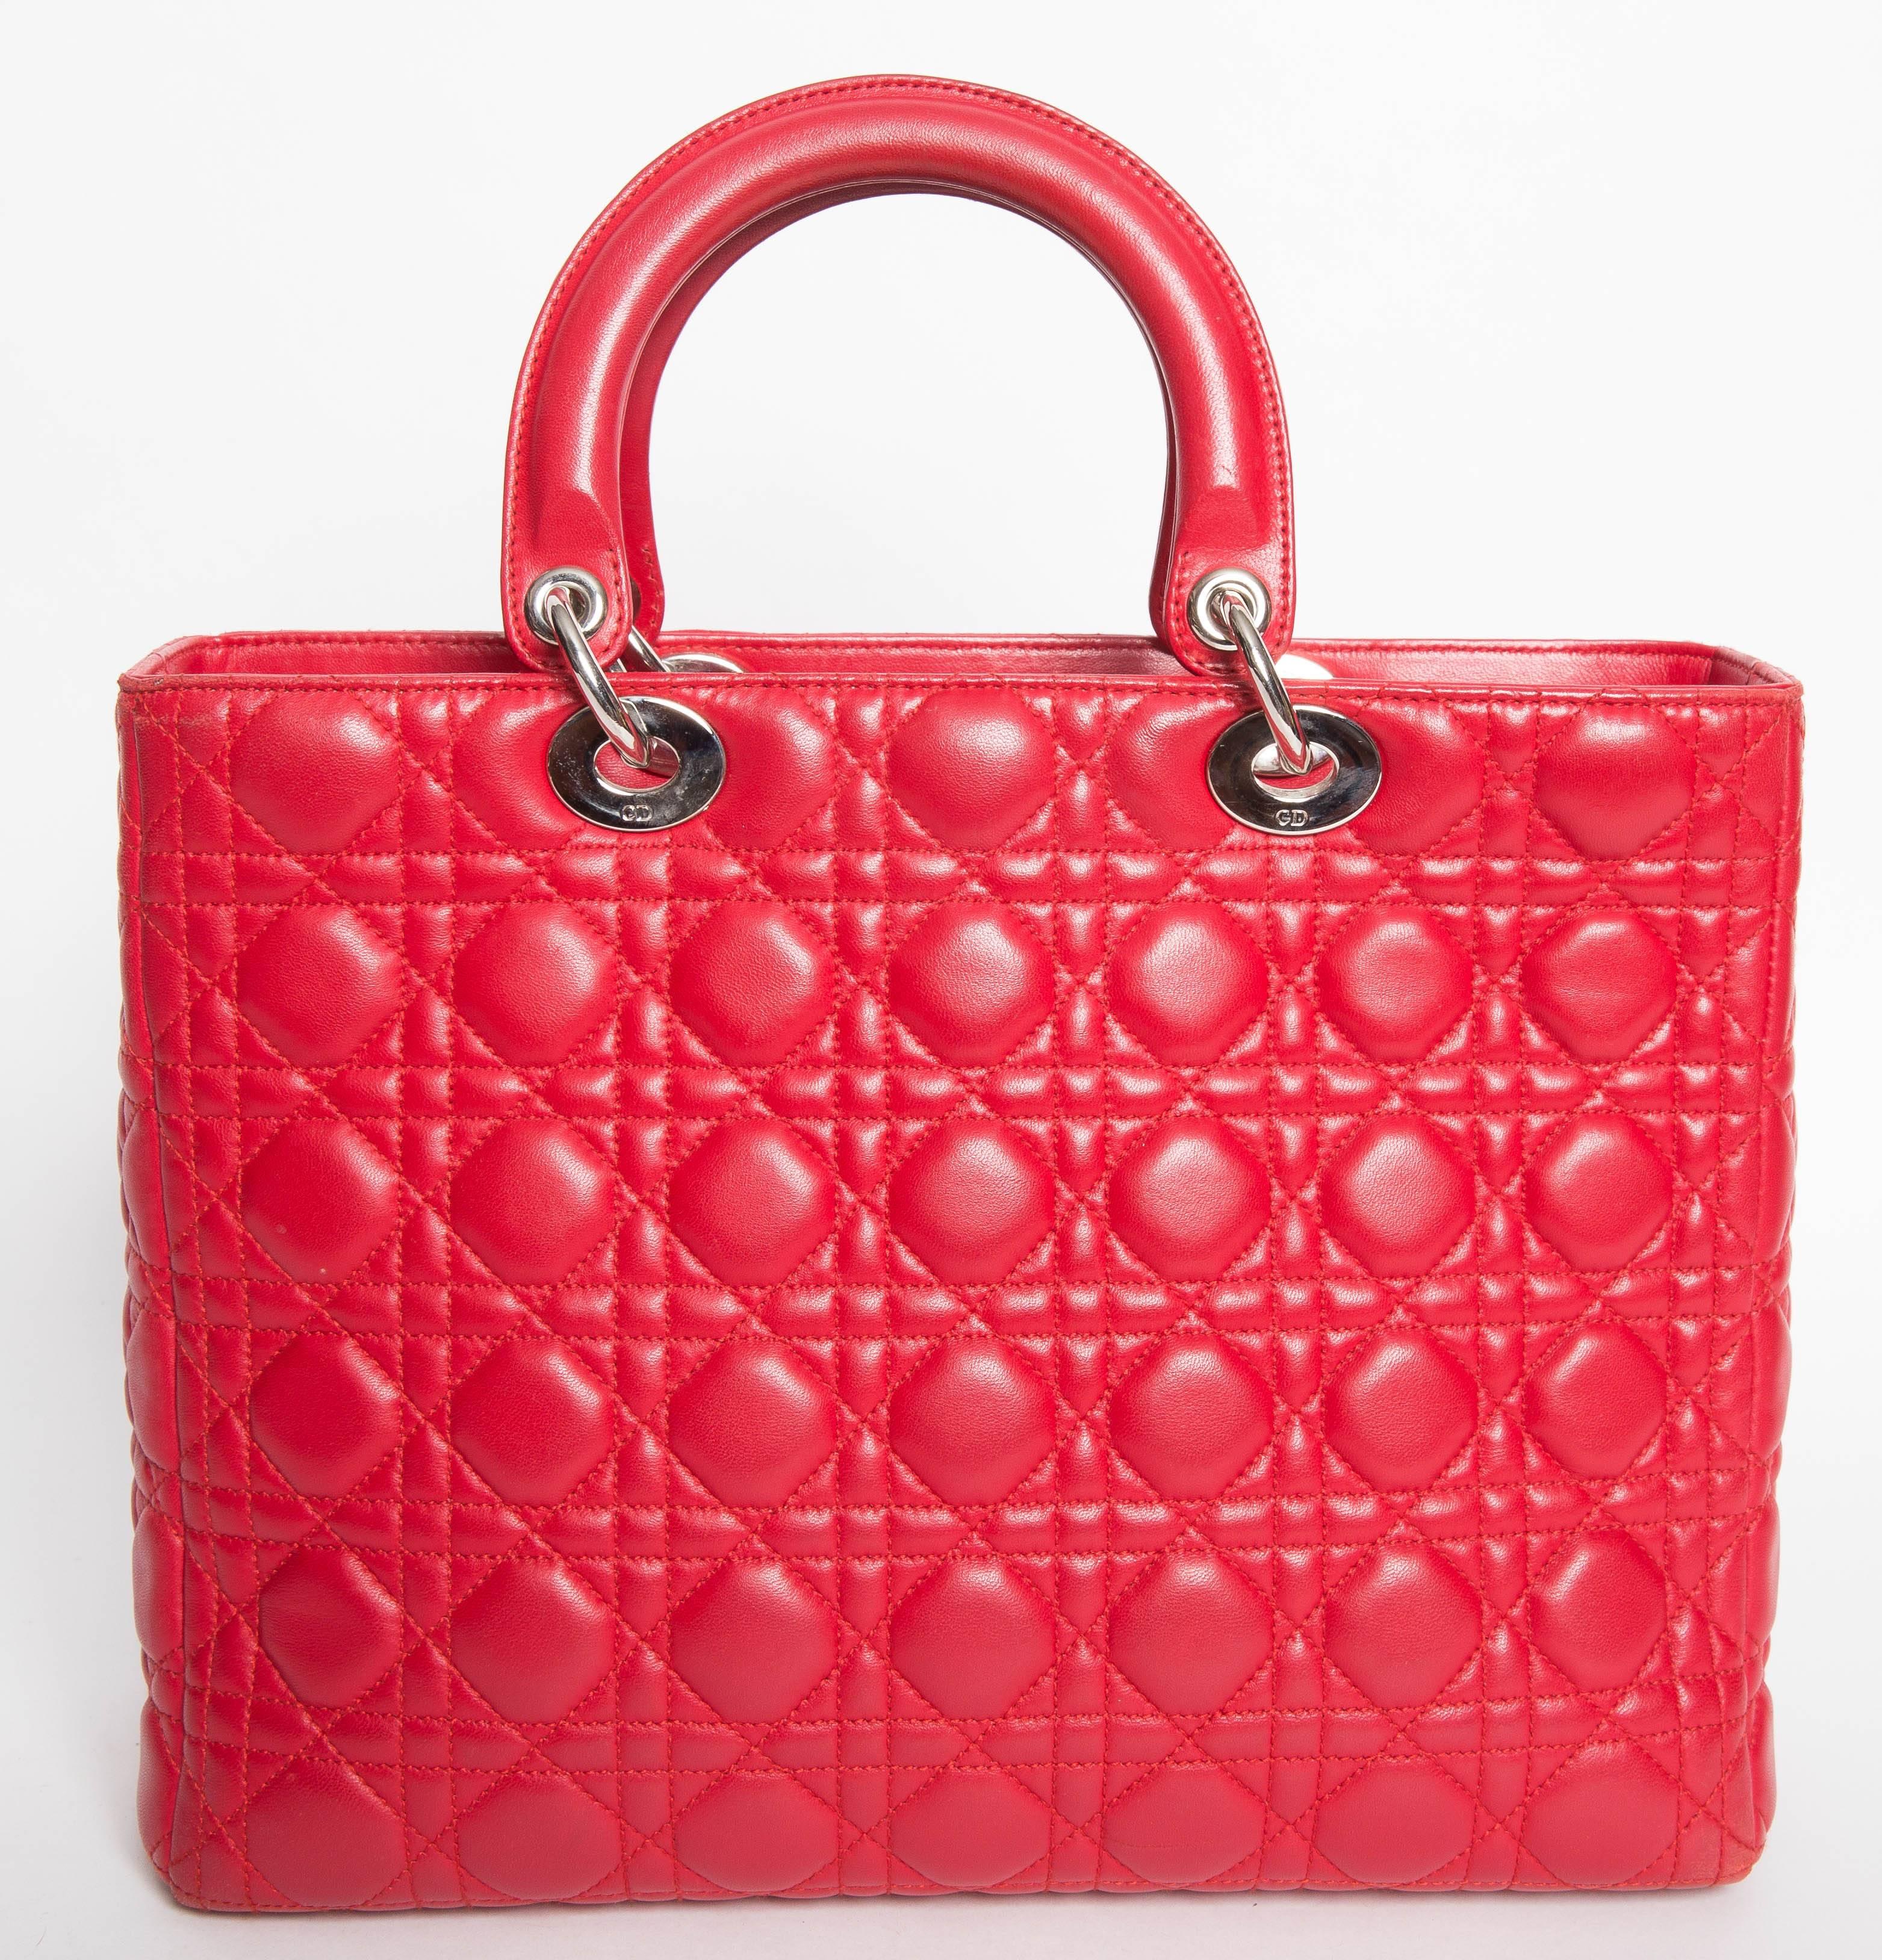 From the 2013 Collection. Red lambskin leather Christian Dior Large Lady Dior bag with silver-tone hardware, tonal stitching throughout, dual flat top handles, logo charm at front, red logo lining, single zip pocket at interior wall and zip closure